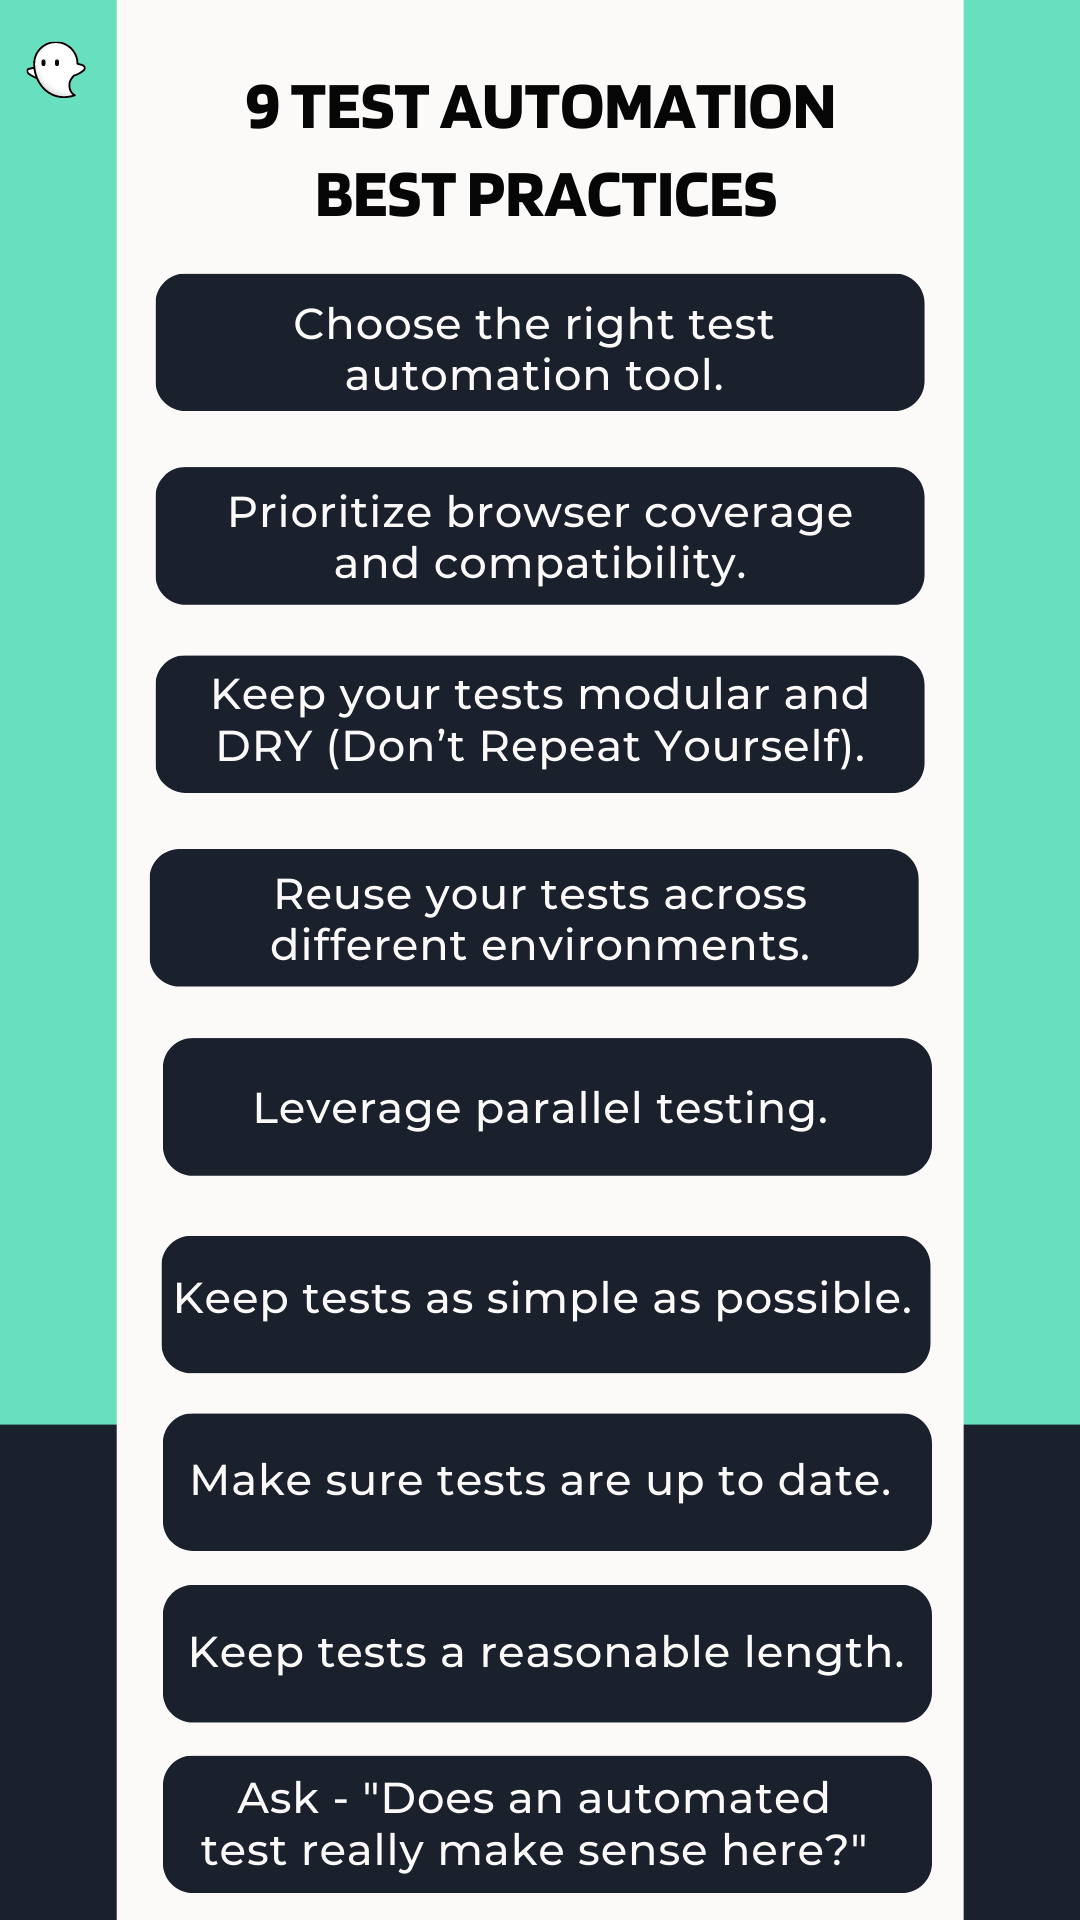 Test automation best practices infographic